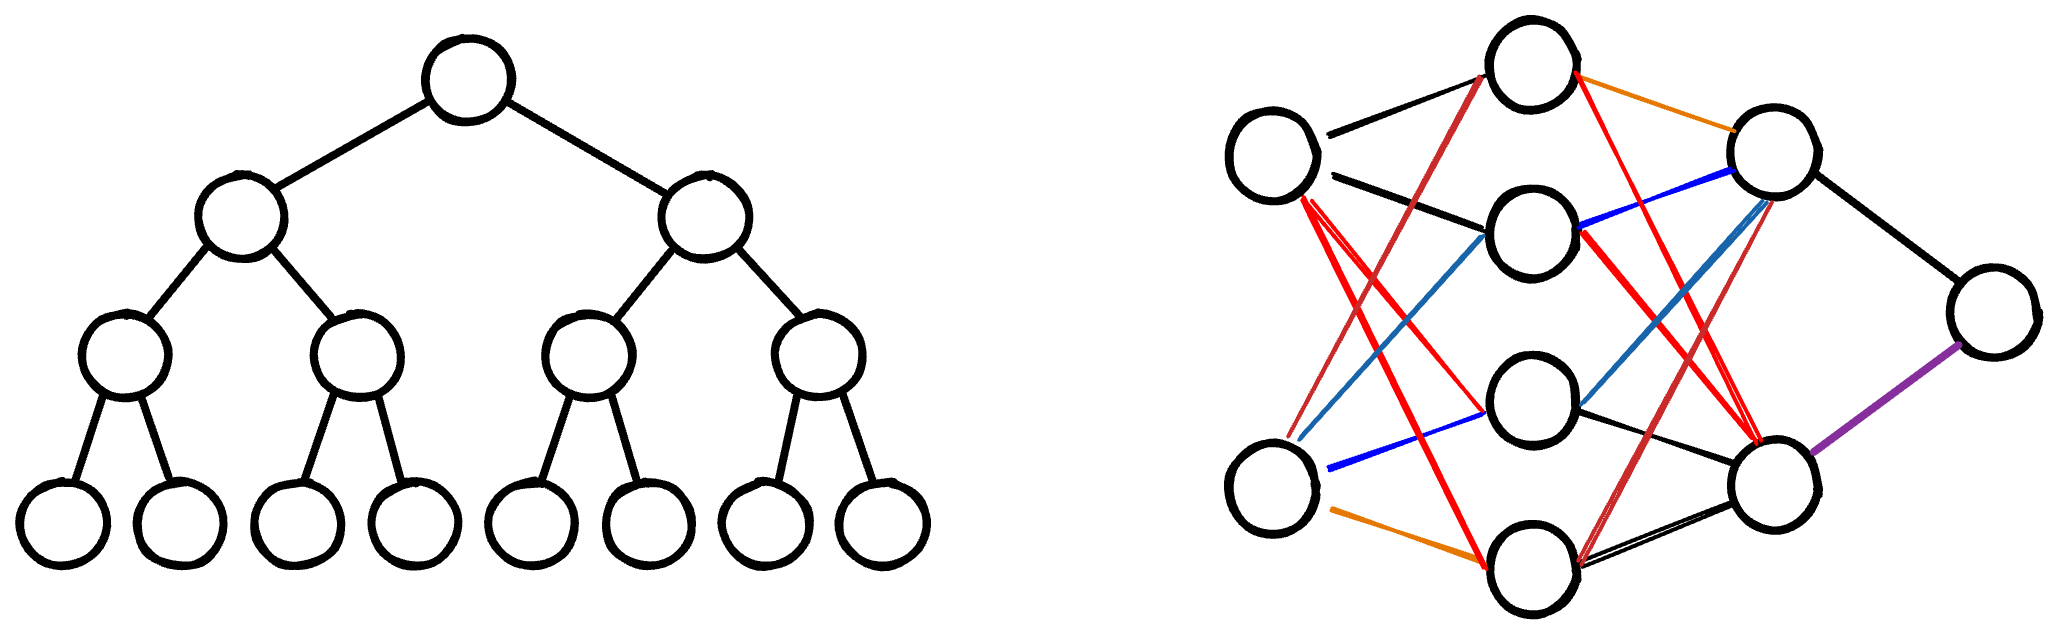 Diagram of a graph hierarchy with one node connected to two child nodes, with each child node having two children, and each child node having two children, alongside a separate graph with two nodes connected to four other nodes which are then connected to two other nodes, culminating in one node with lots of connections.